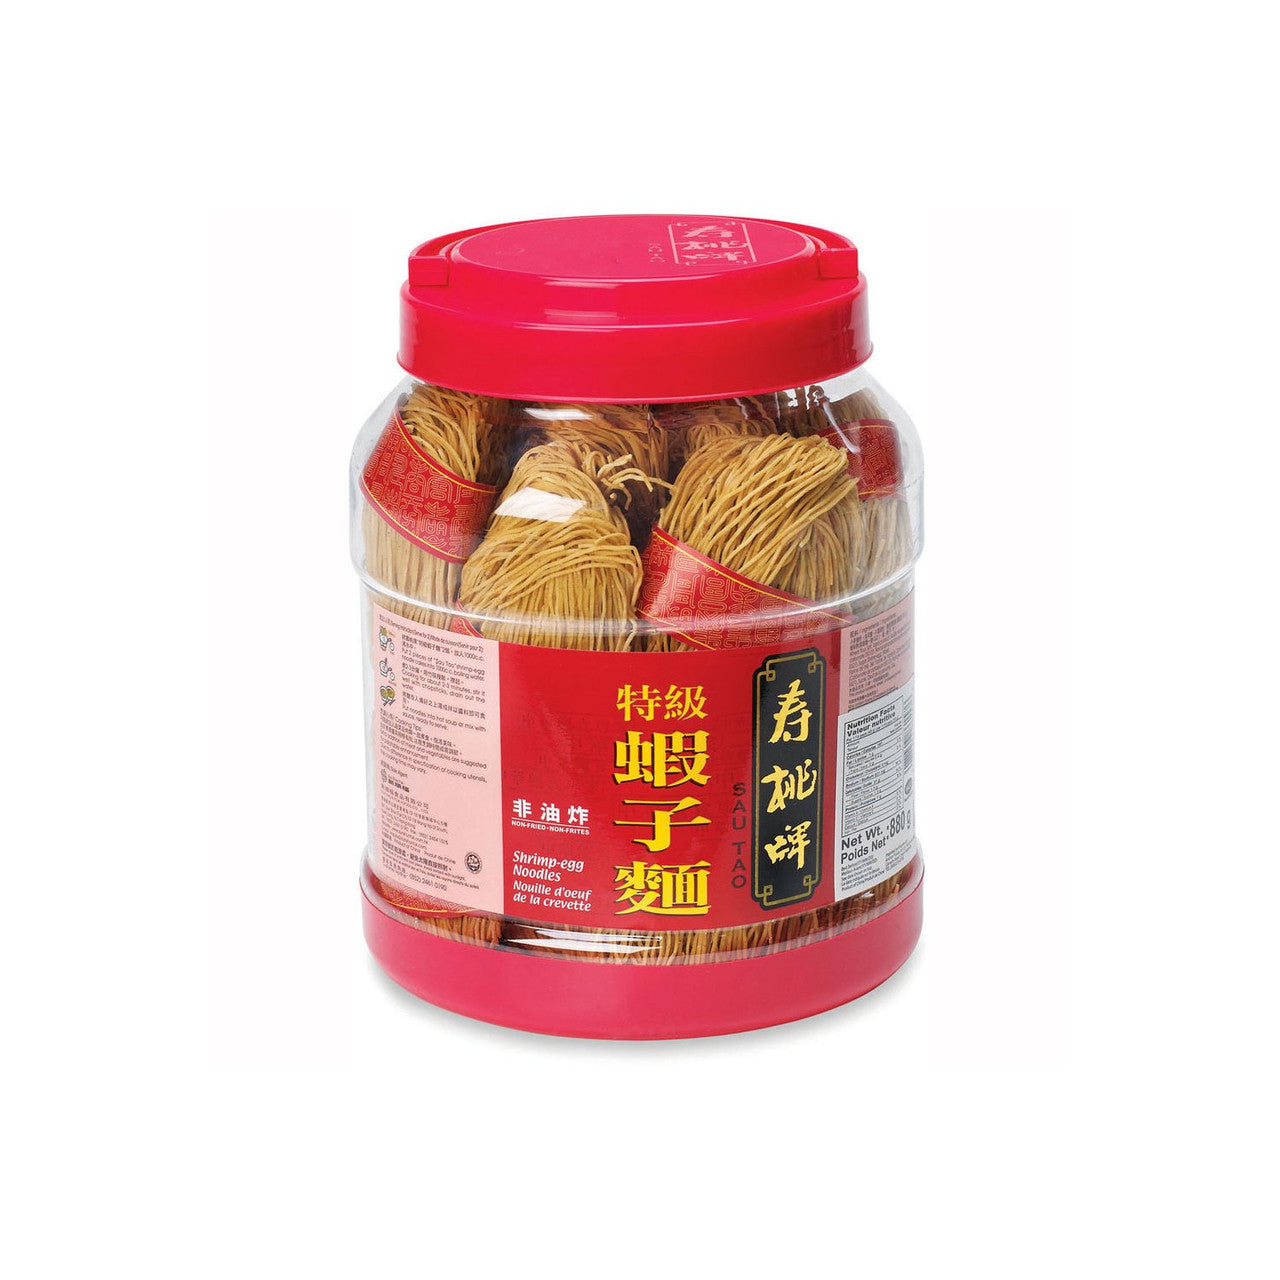 Sau Tao Chinese Noodles Non-fried Shrimp-Egg Flavor, 880g/1.9 lbs. {Imported from Canada}